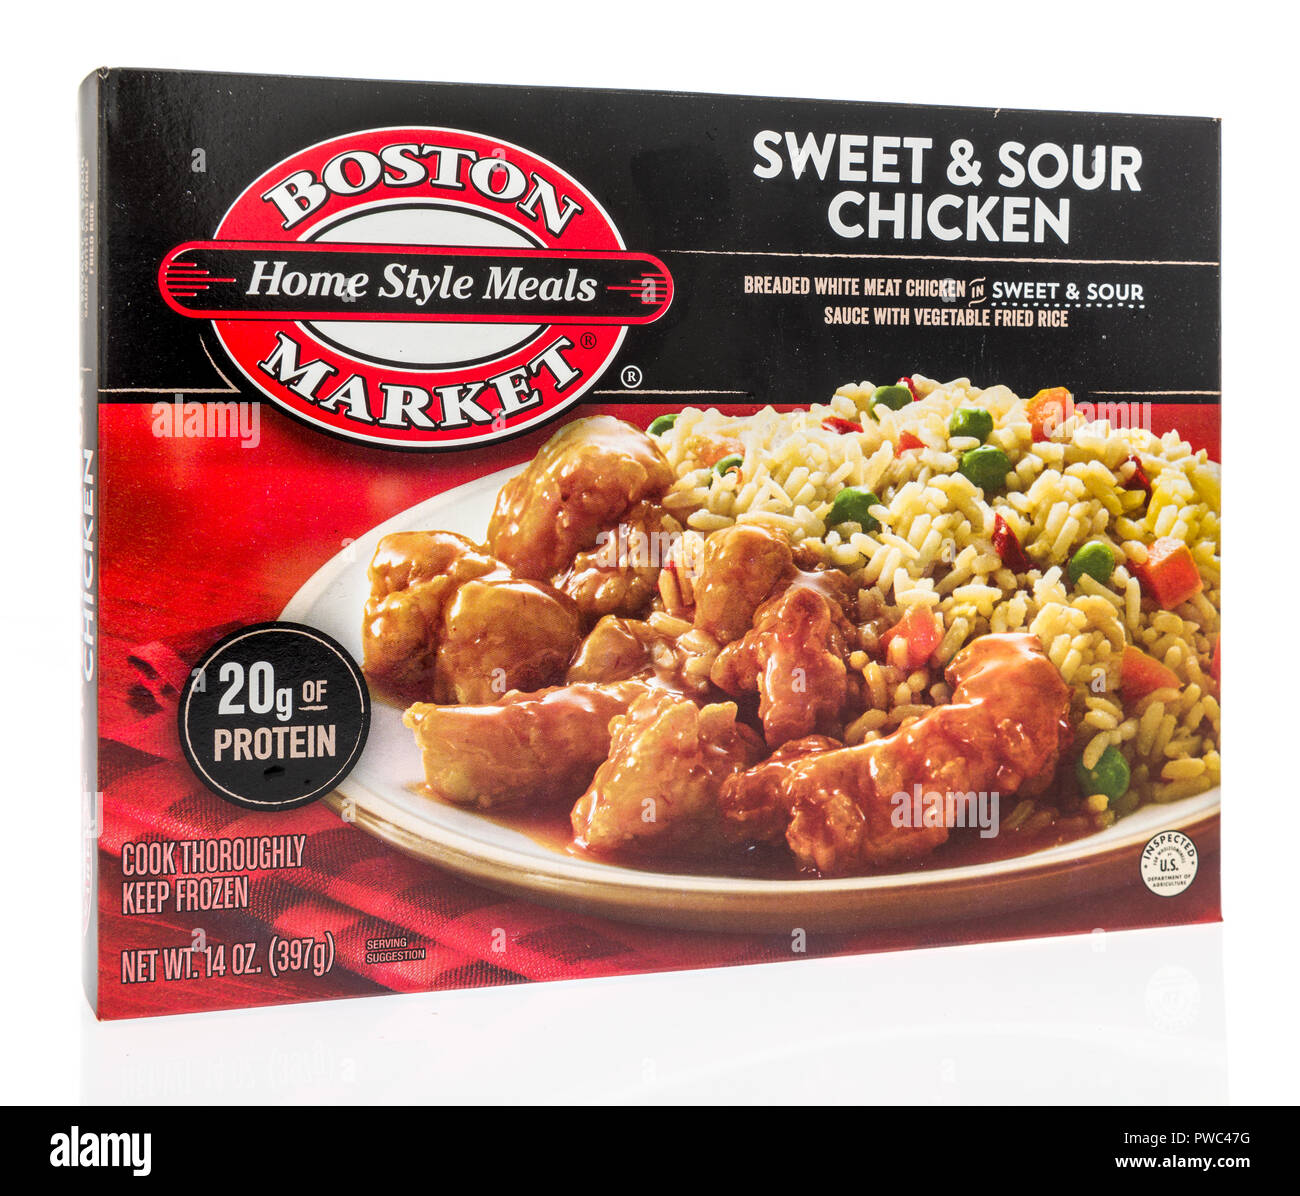 Winneconne, WI - 29 September 2018: A box of Boston Market home style meals in sweet and sour chicken on an isolated background Stock Photo